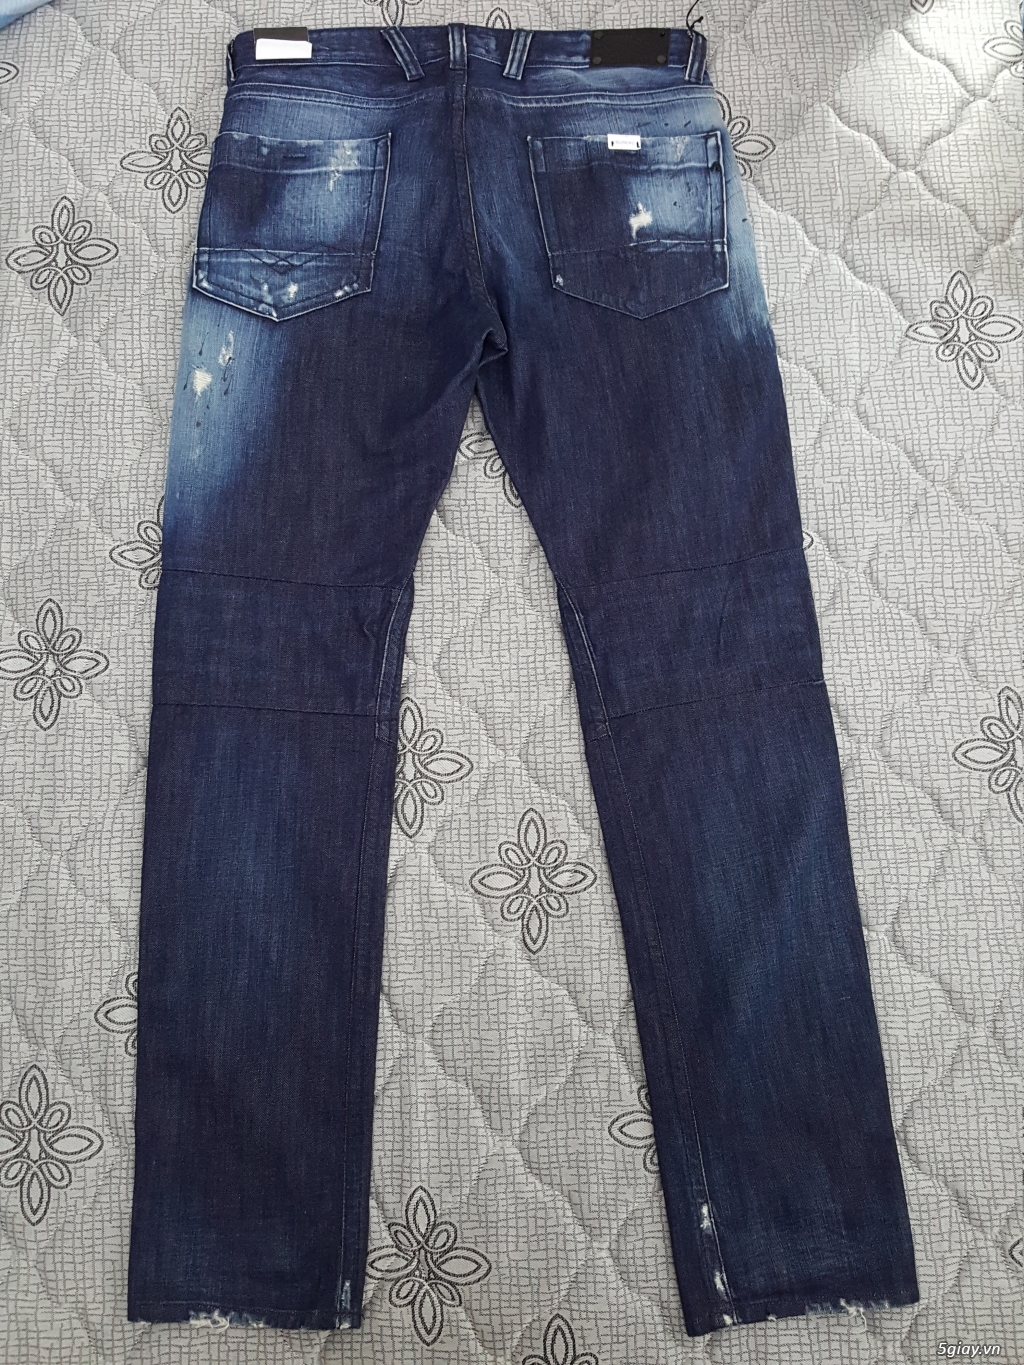 Jeans REPLAY Lonham size 31 - New full tags ! - 2